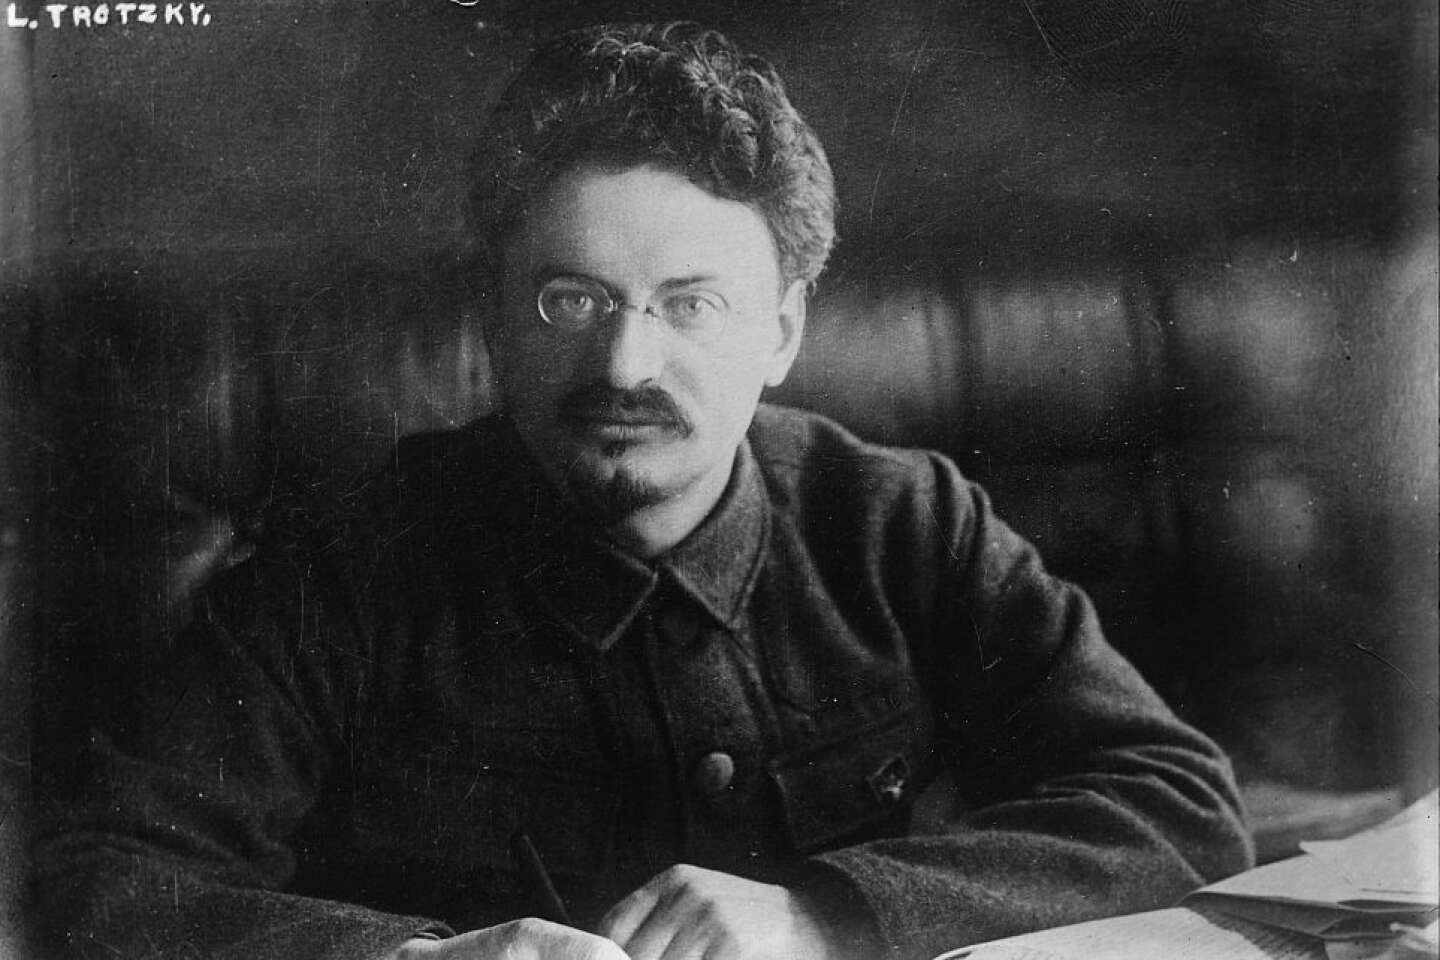 how stalin got rid of his capital enemy